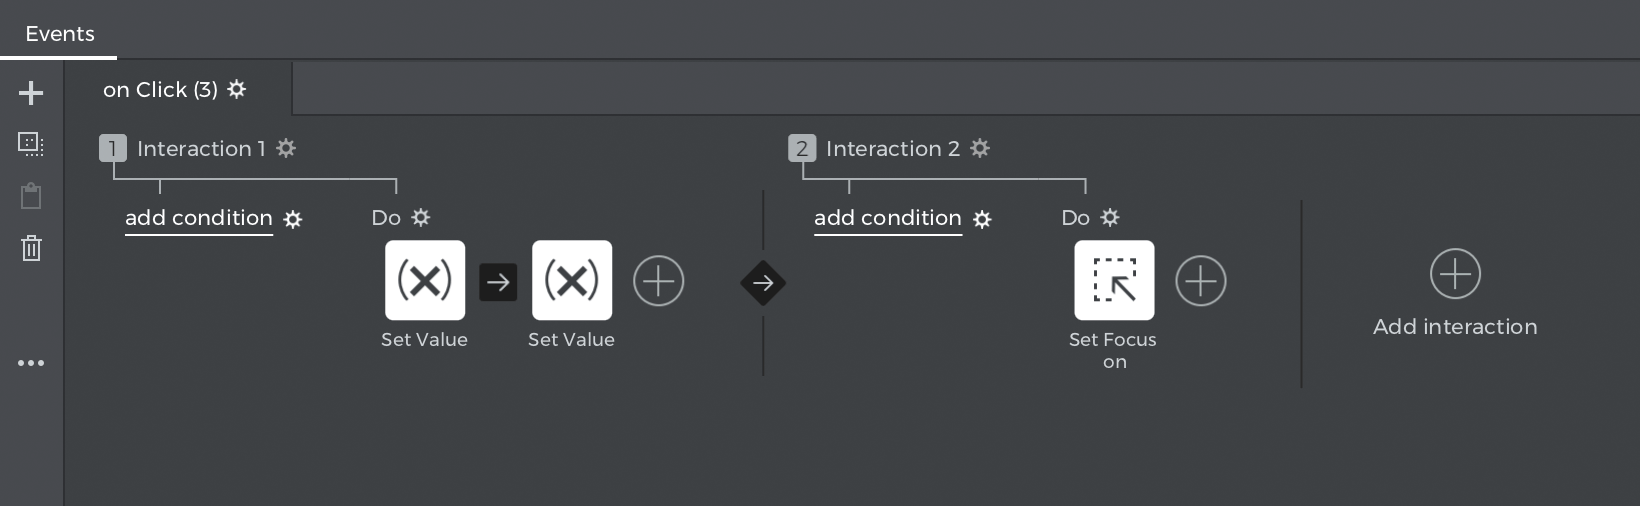 Interactive wireframes: autopopulate text - Events